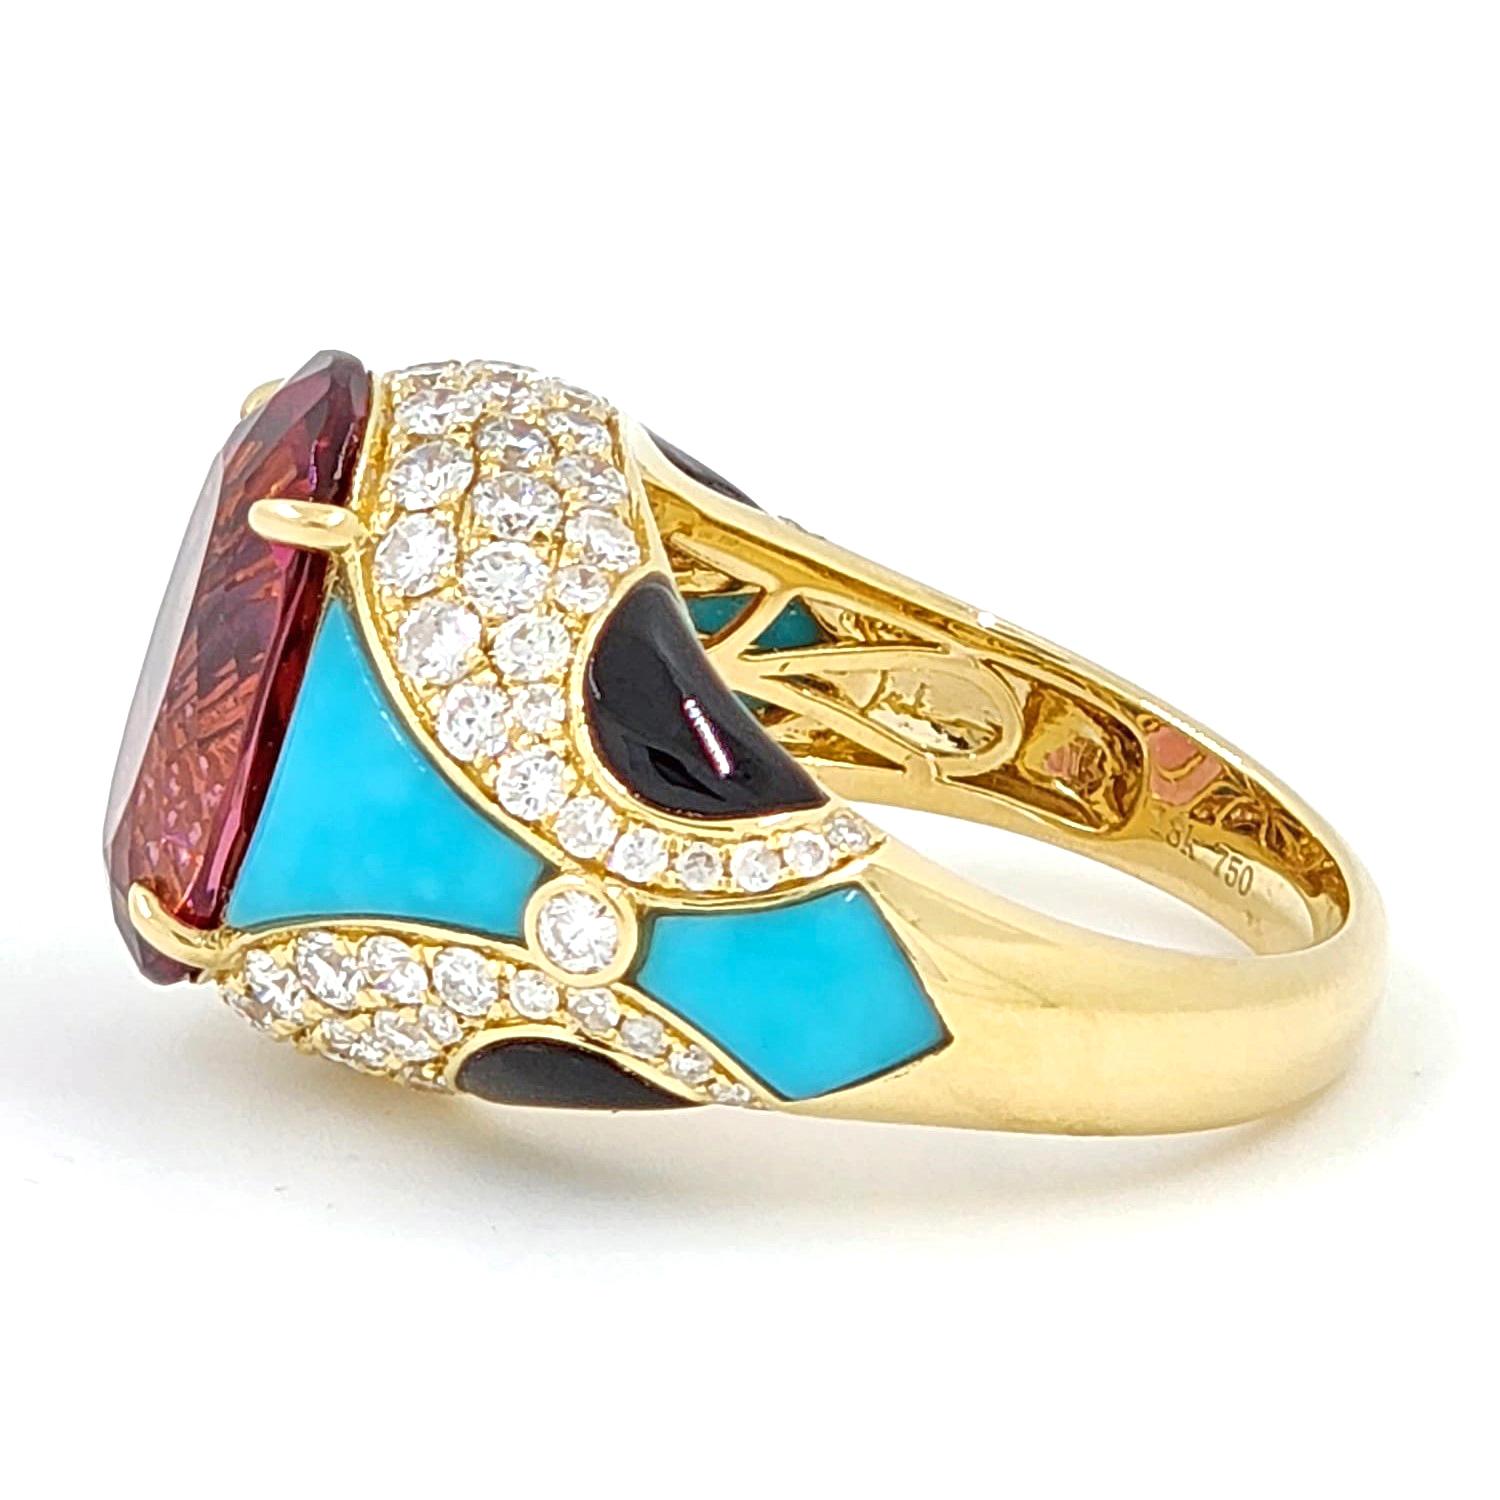 Art Deco Rubellite Turquoise Onyx Diamond Cocktail Ring in 18 Karat Yellow Gold For Sale 2